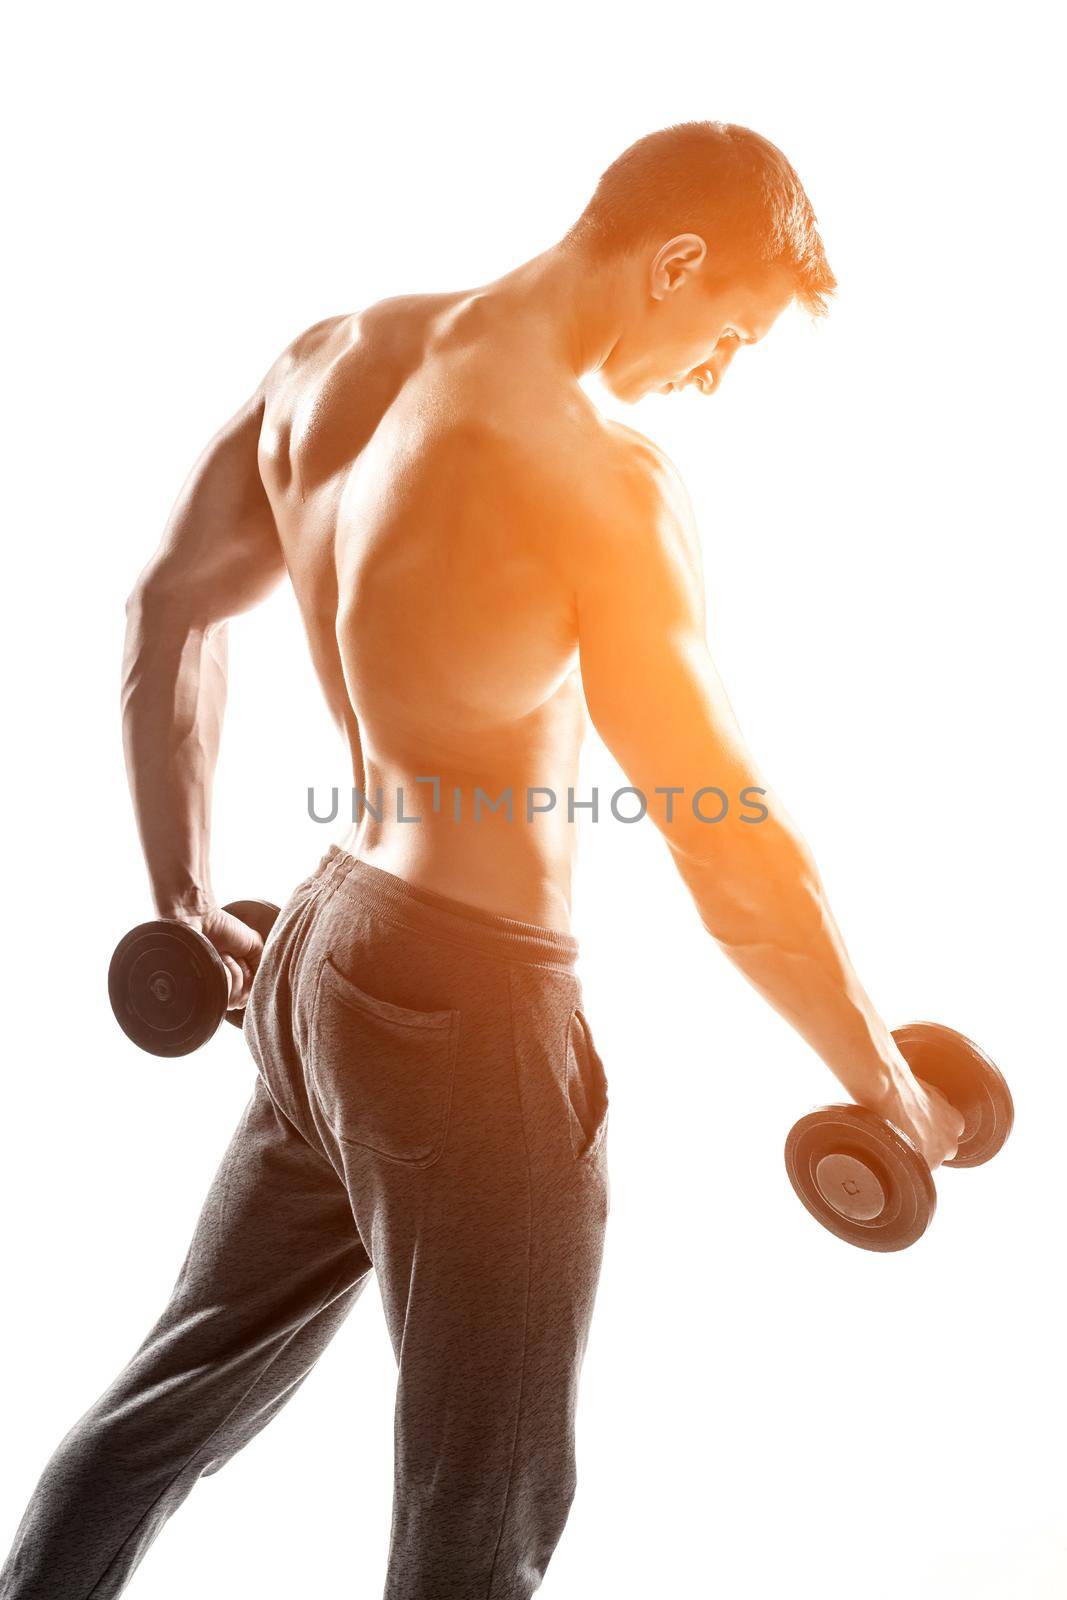 Handsome muscular man doing exercises with dumbbells isolated on white background Whith solar flare